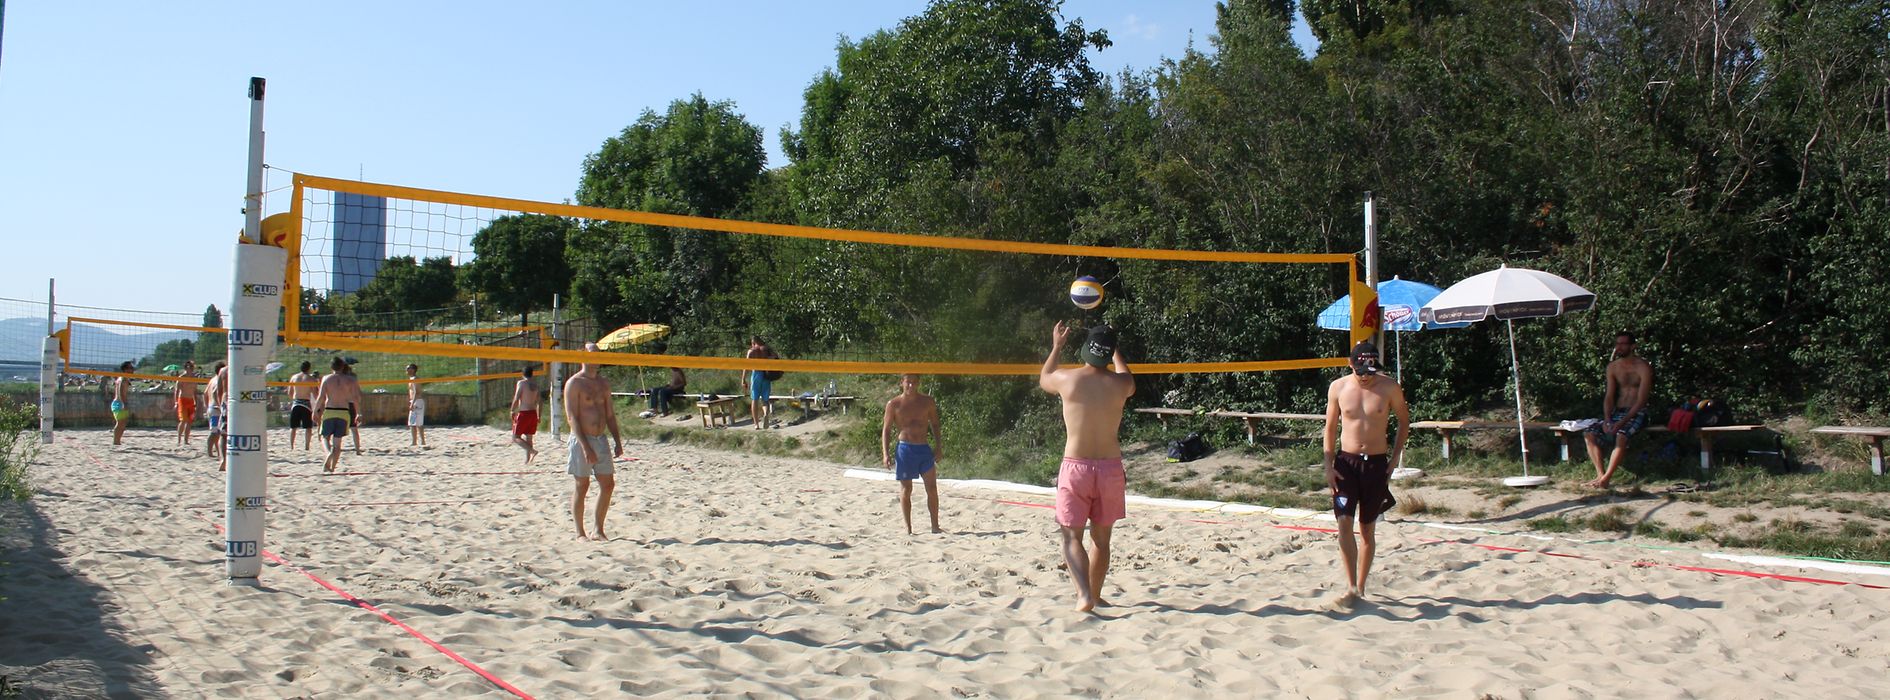 Beach volleyball players in action at the Vienna City Beach Club